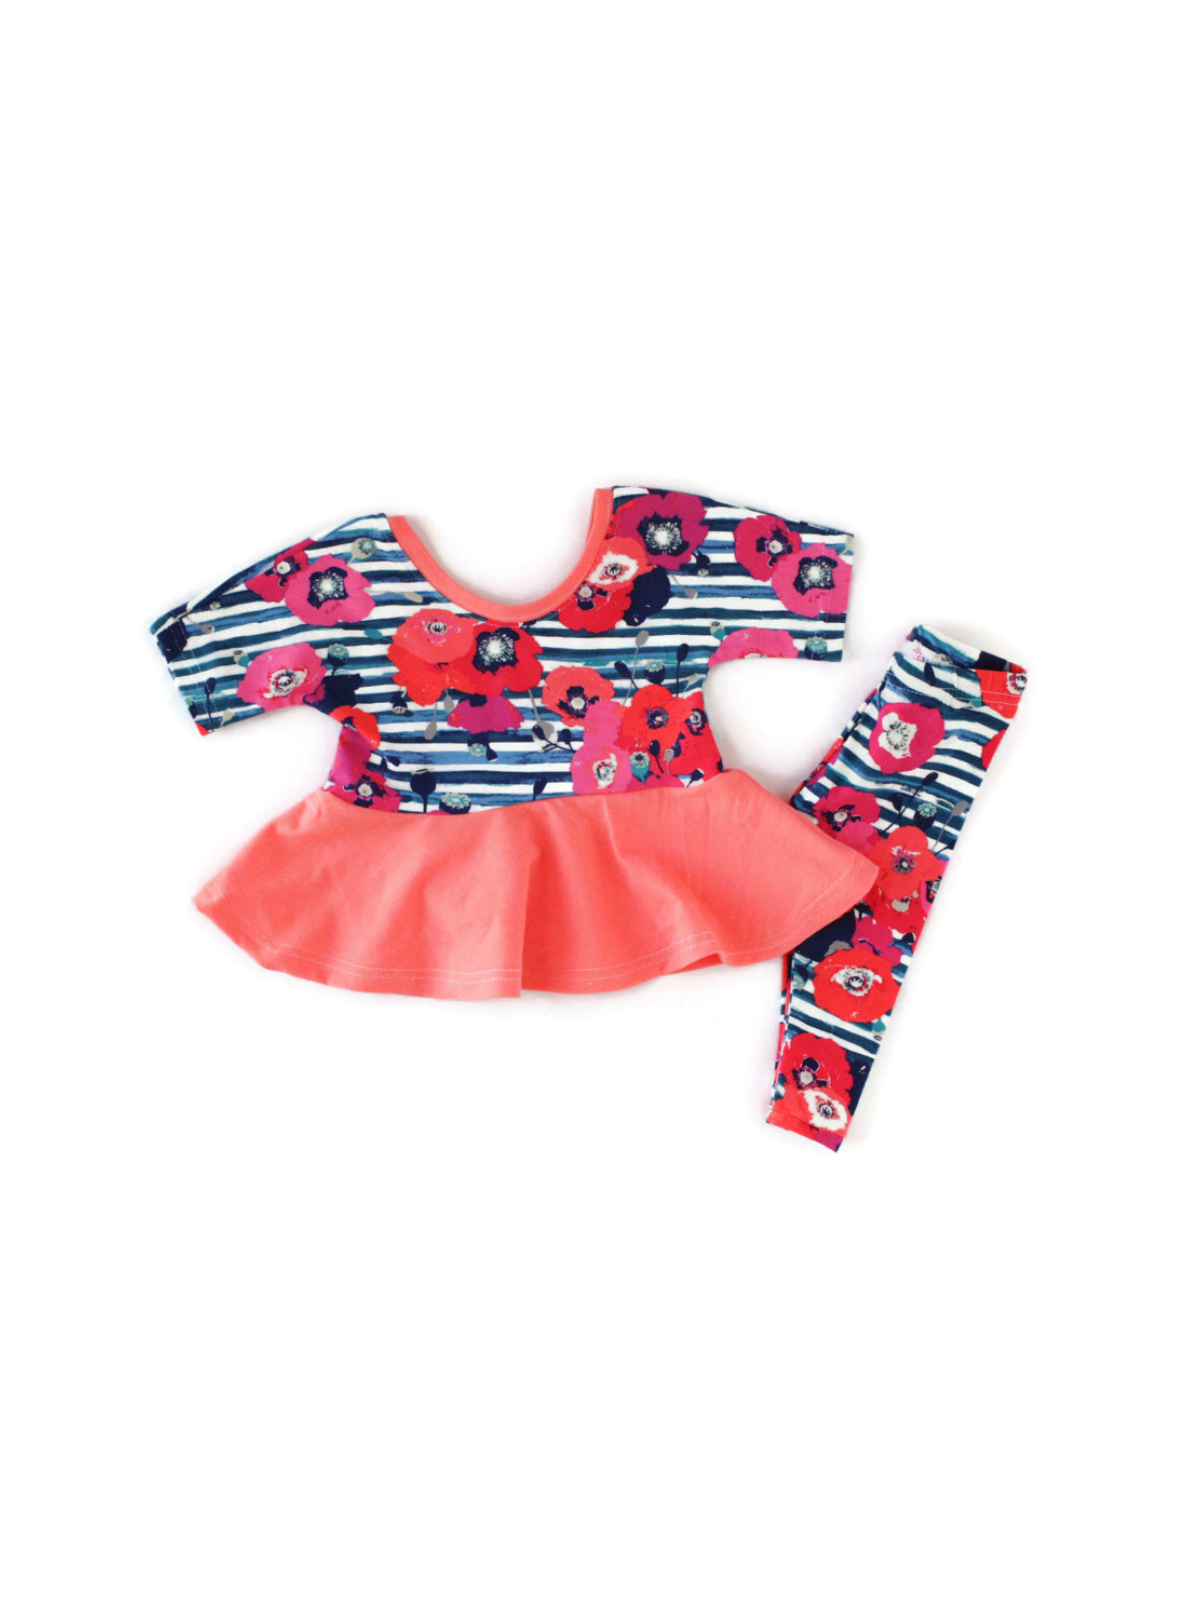 flowers and stripes pink blue and peach baby girl outfit